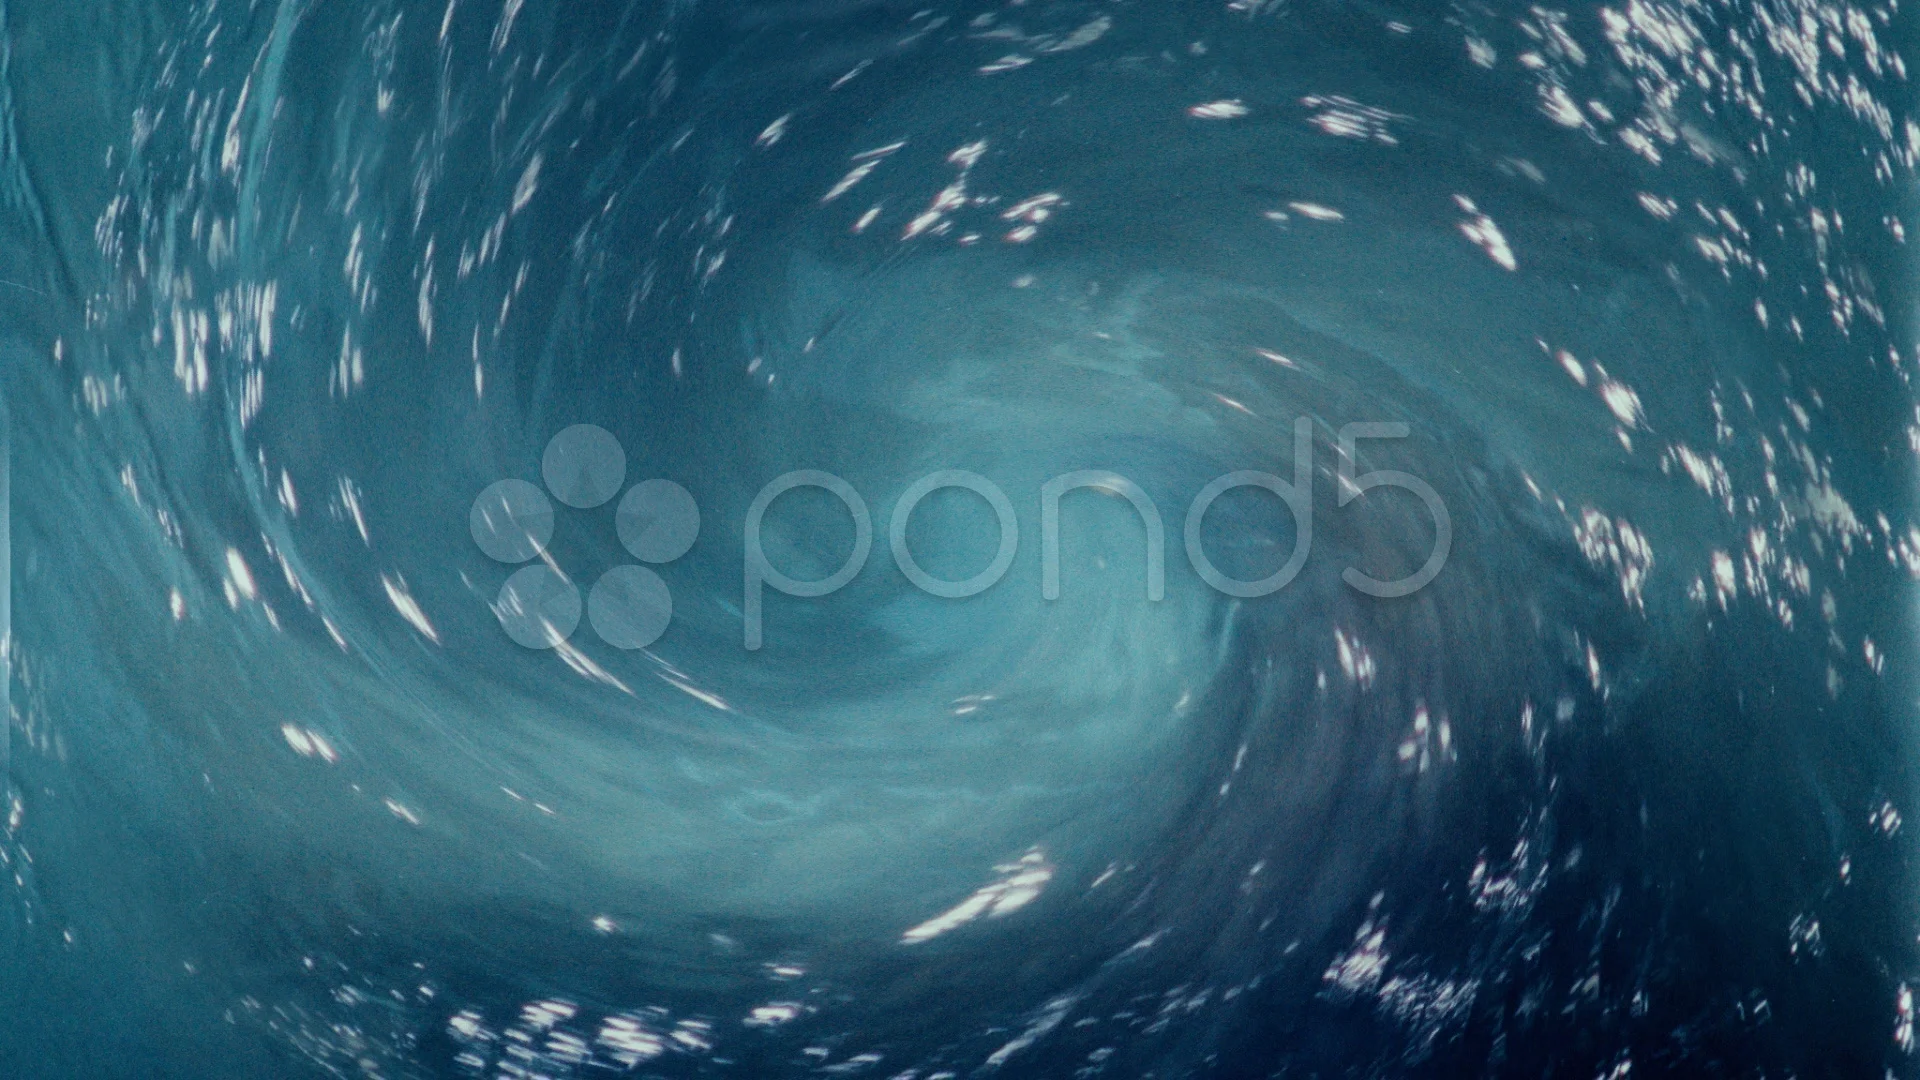 The water swirls into a whirlpool. The water is blue and clear. The wave  takes the